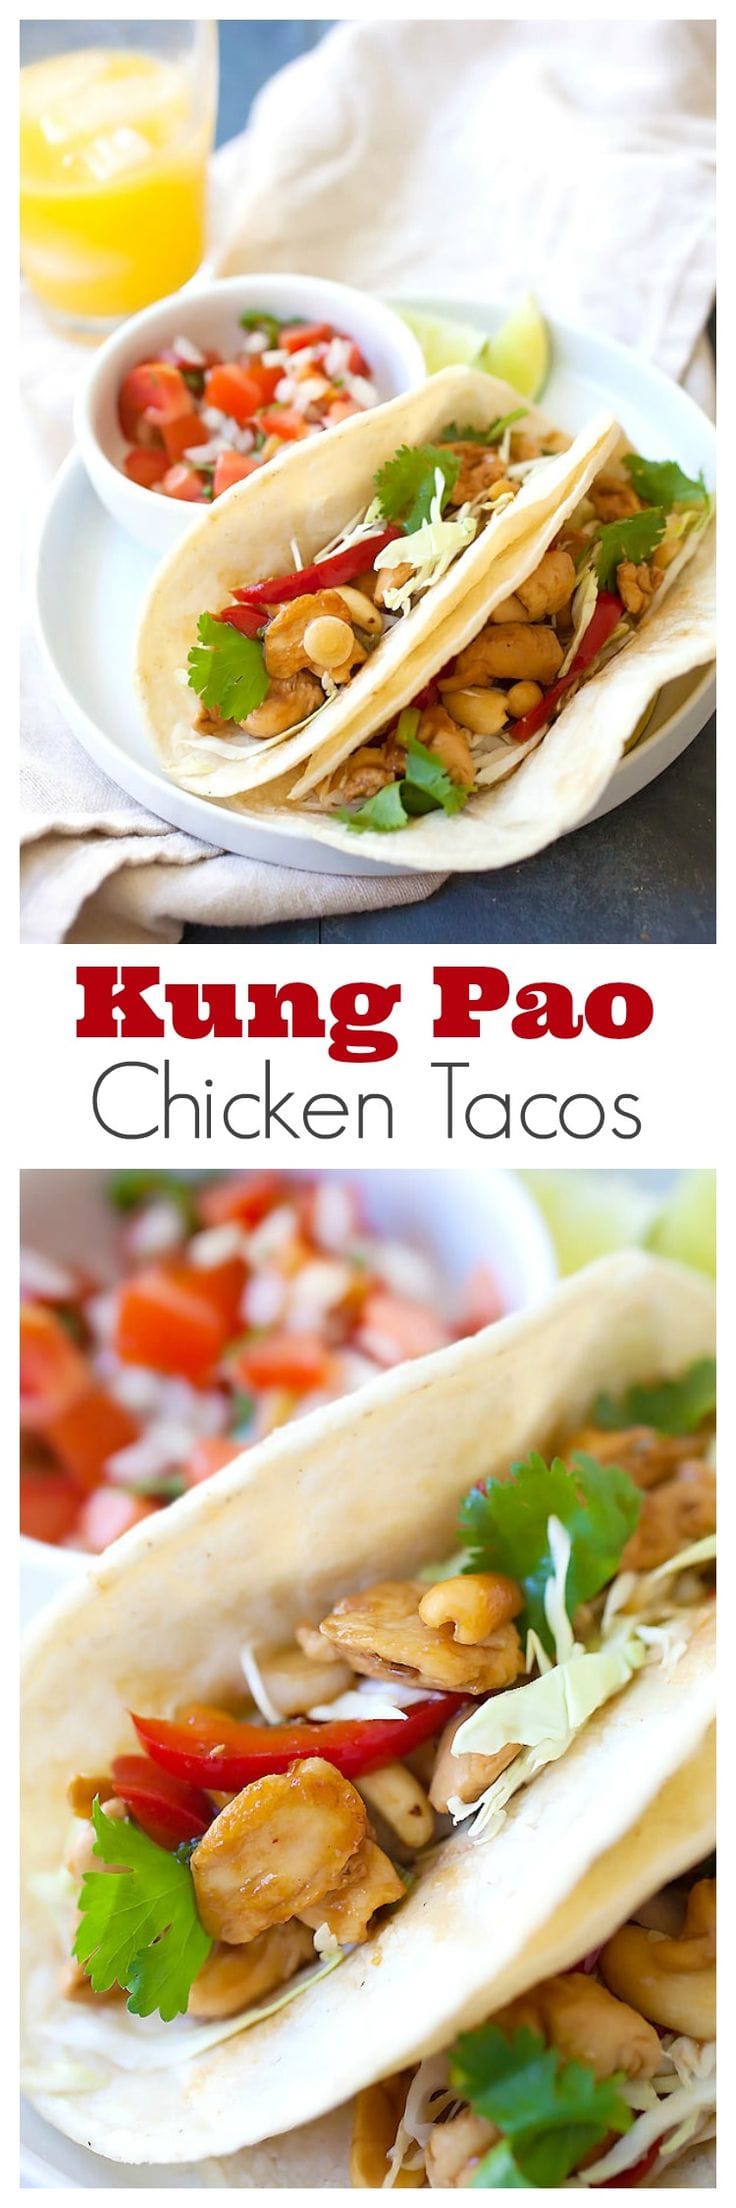 Kung Pao Chicken Tacos - amazing tacos with Chinese Kung Pao Chicken. Savory and slightly spicy chicken and roasted peanuts make the tacos so delicious | rasamalaysia.com